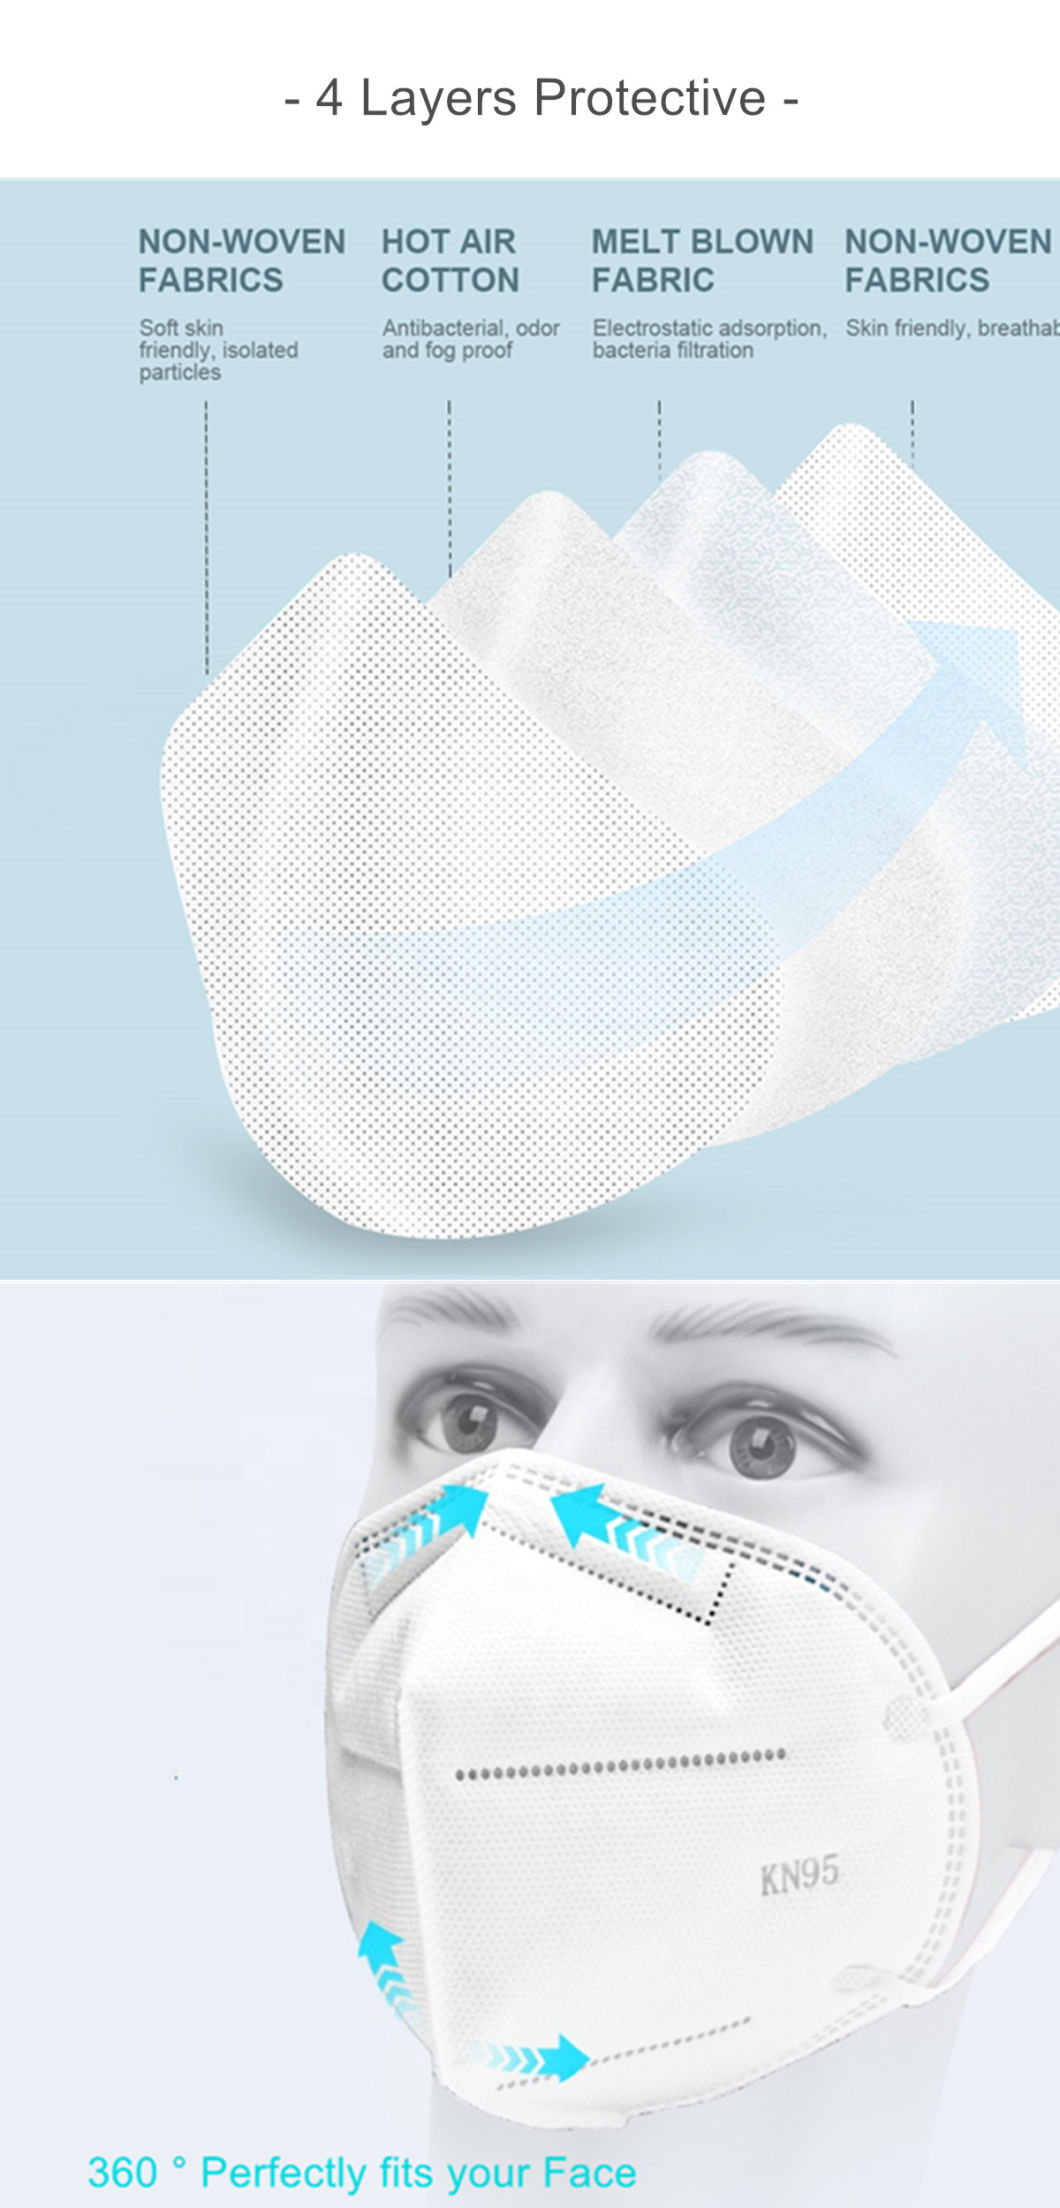 Factory Wholesale FFP3 Face Mask Made in China Fish Mouth Type Disposable Mask with Ce Certified